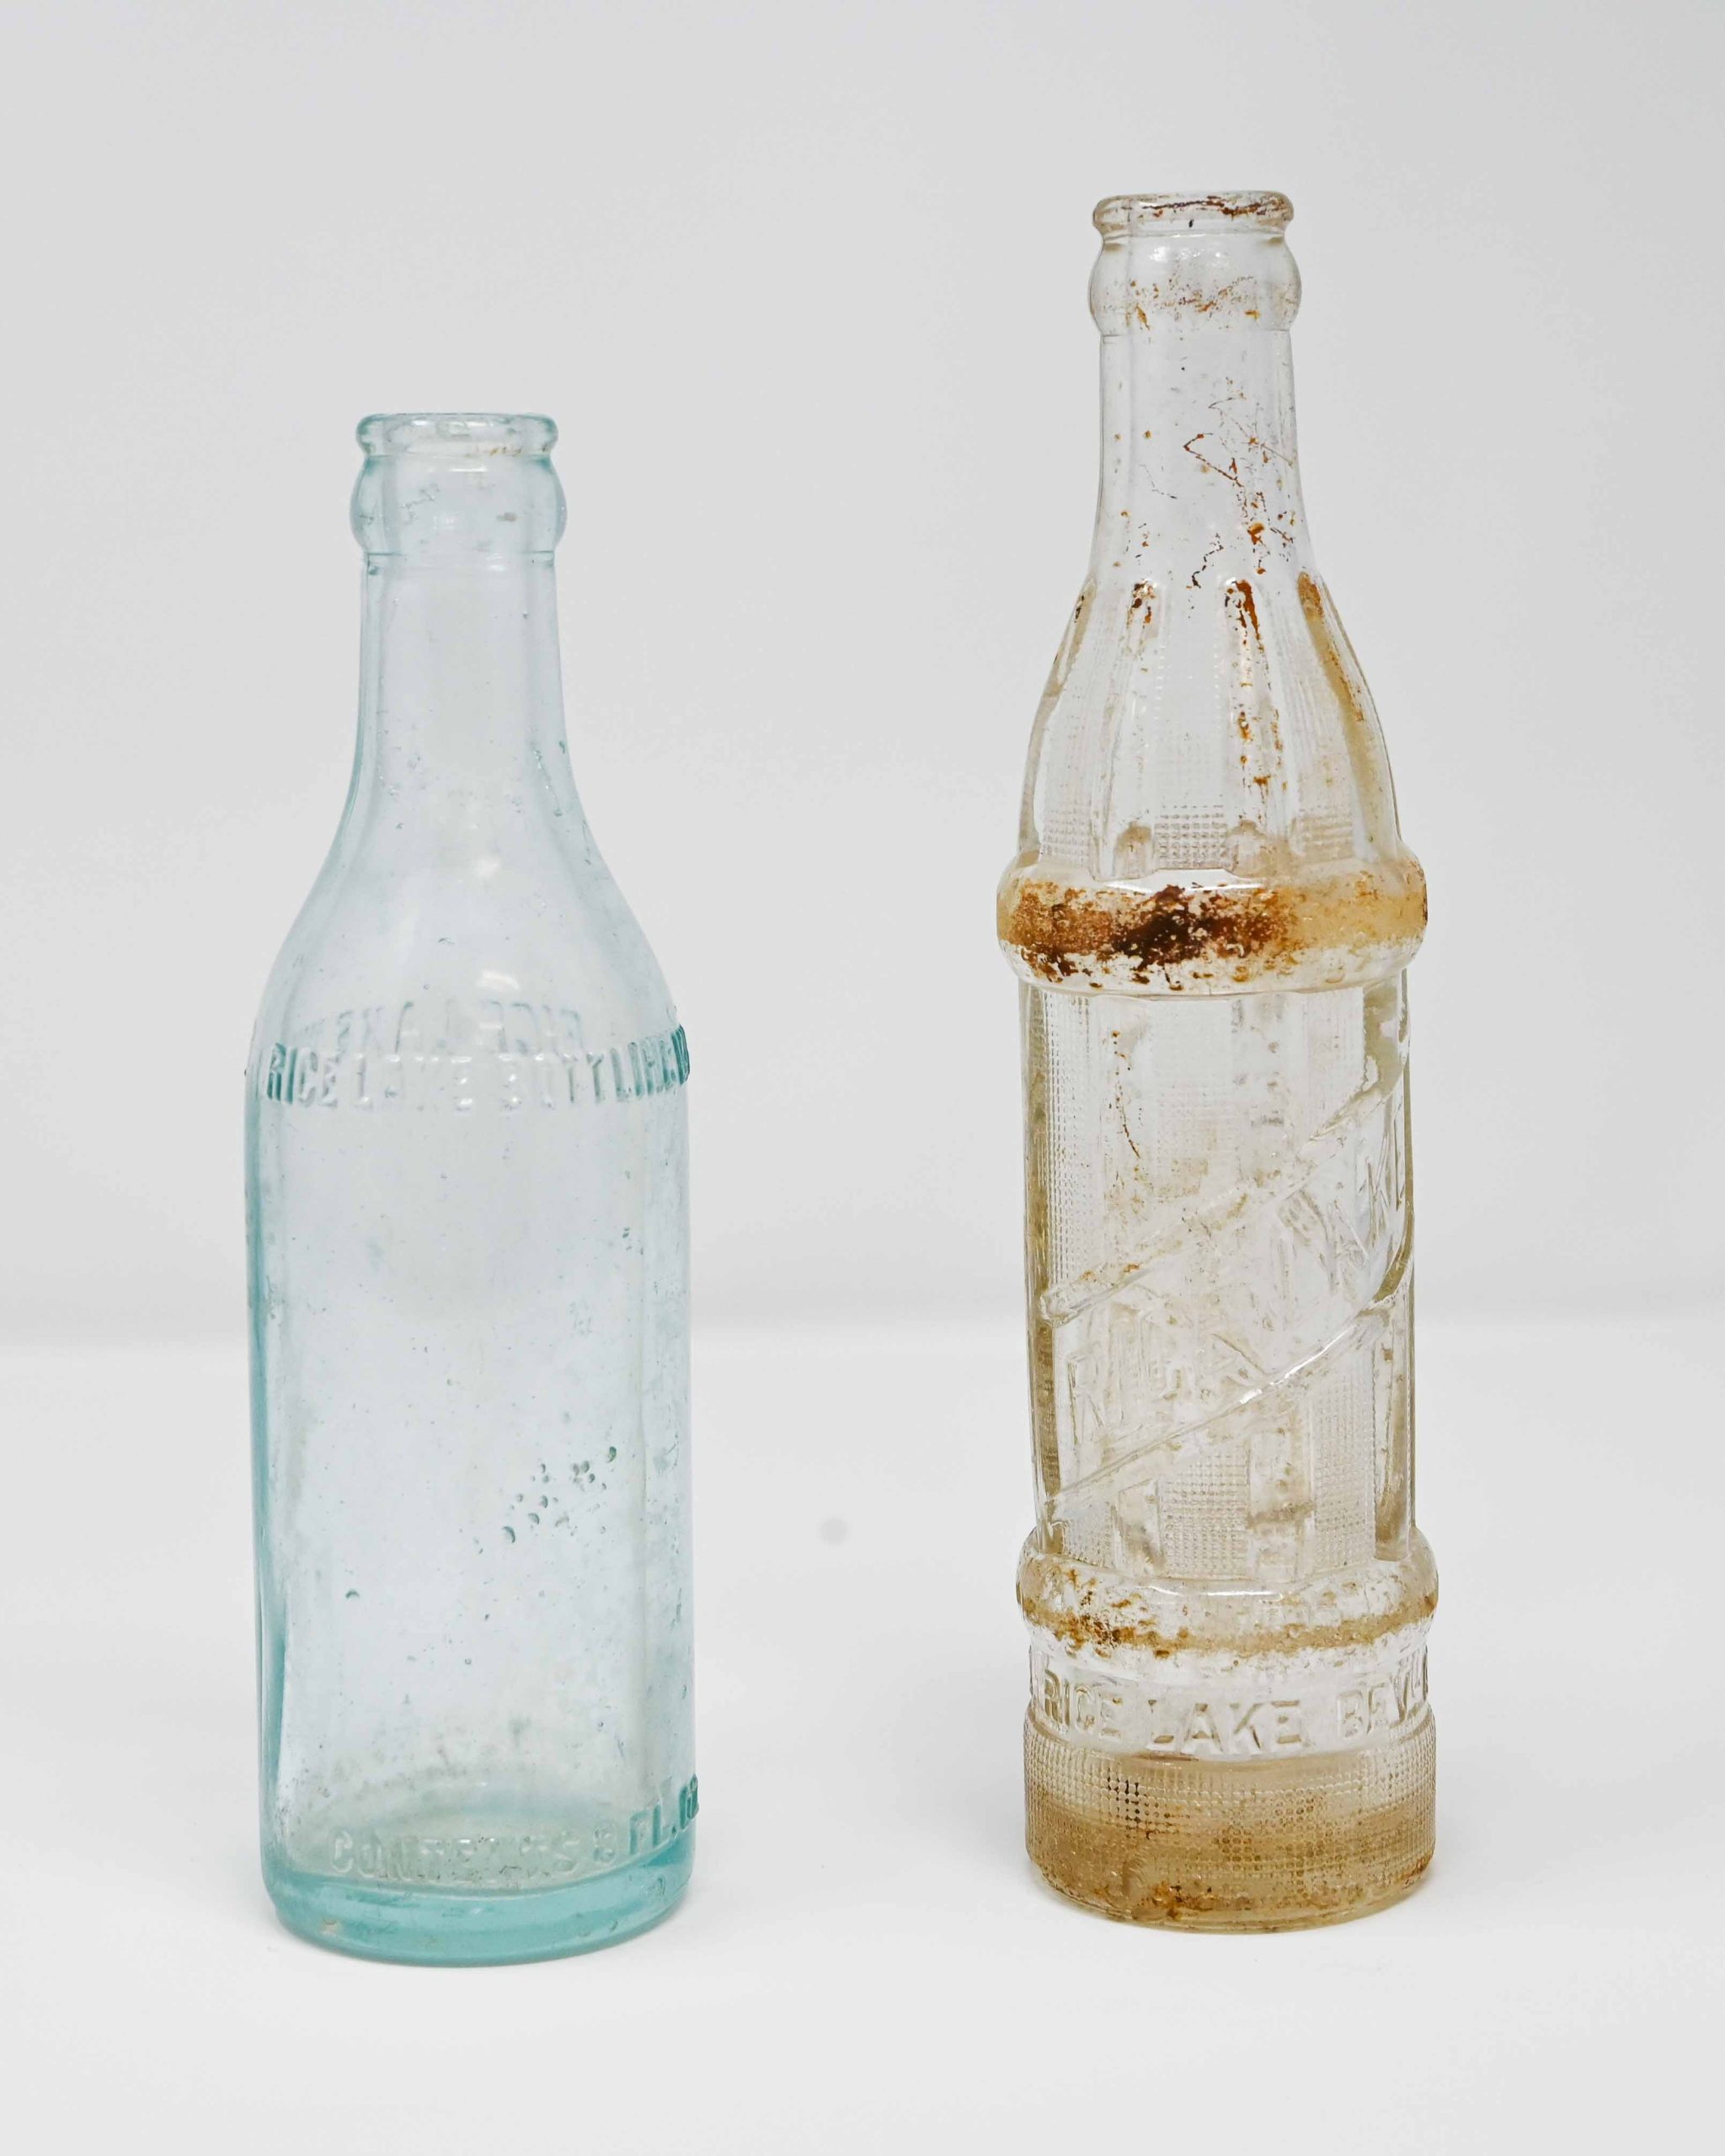 Early 20th Century Glass Bottles from Rice Lake Bottling Works